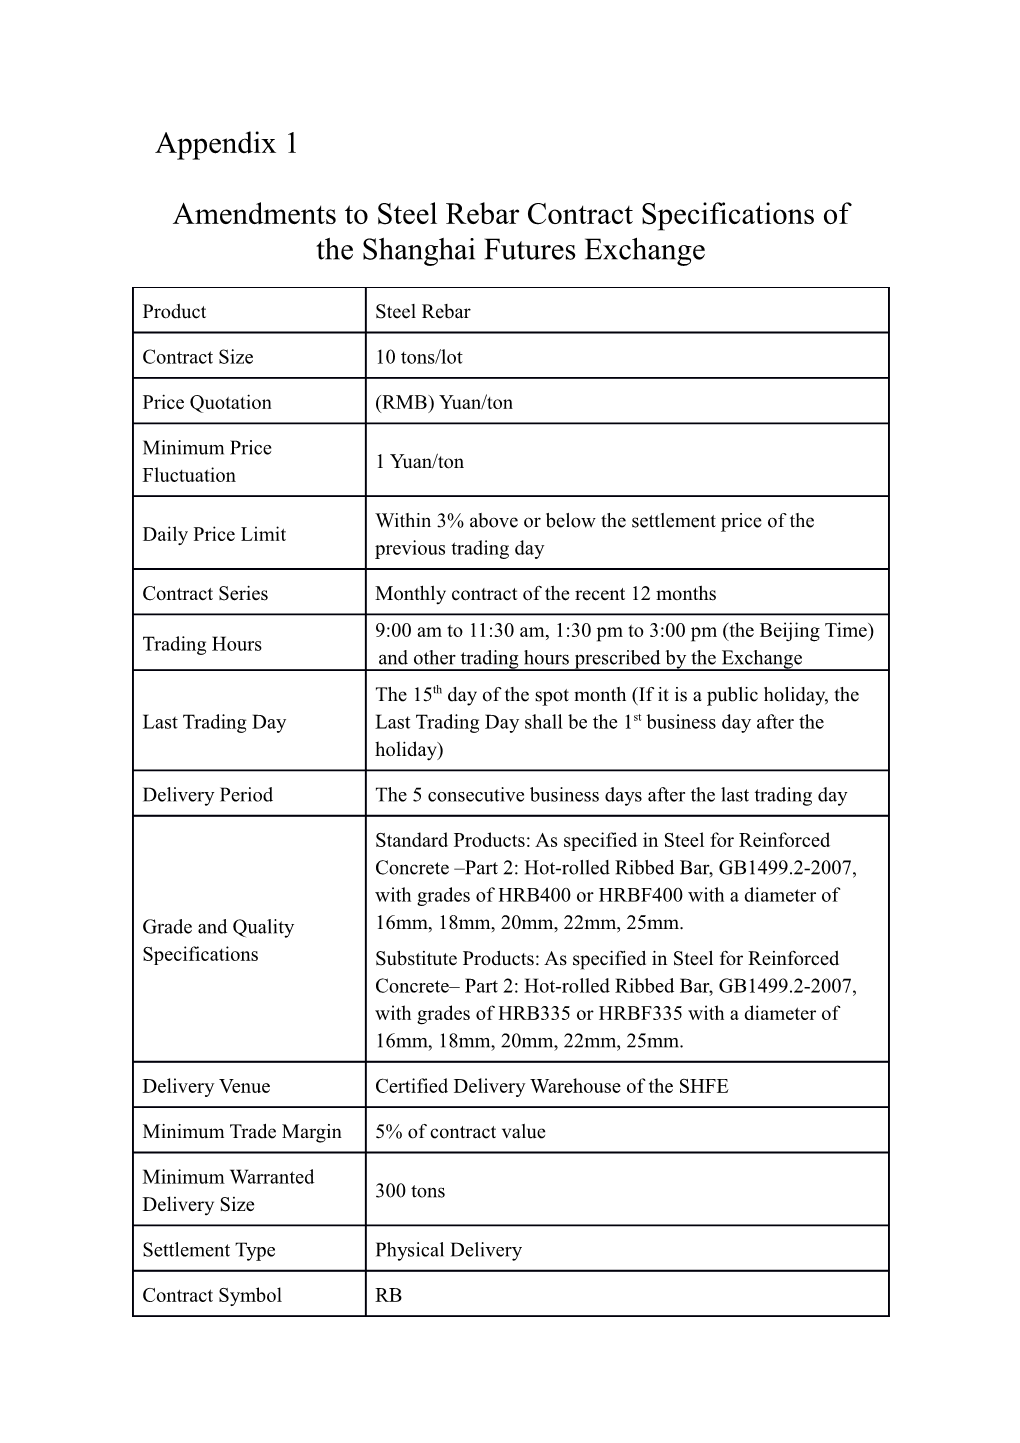 Amendments to Steel Rebar Contract Specifications of the Shanghai Futures Exchange